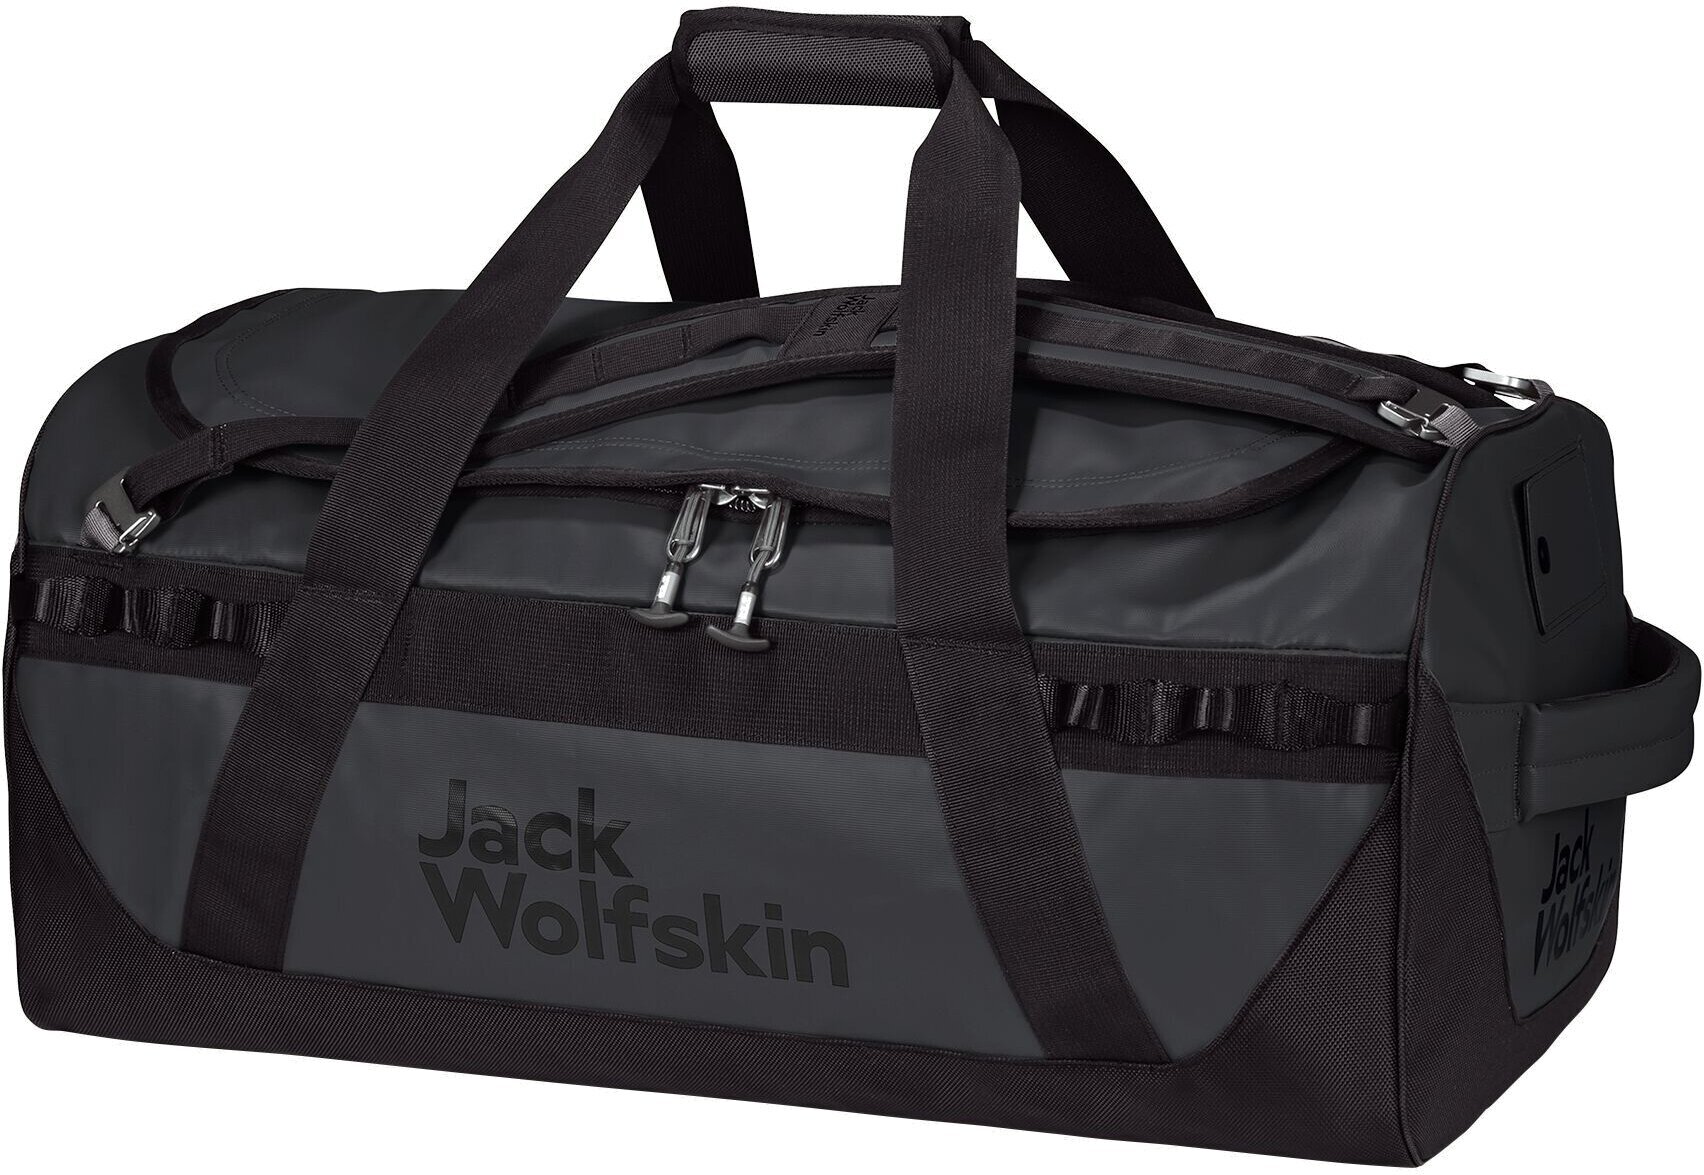 Outdoor Backpack Jack Wolfskin Expedition Trunk 65 Black One Size Outdoor Backpack